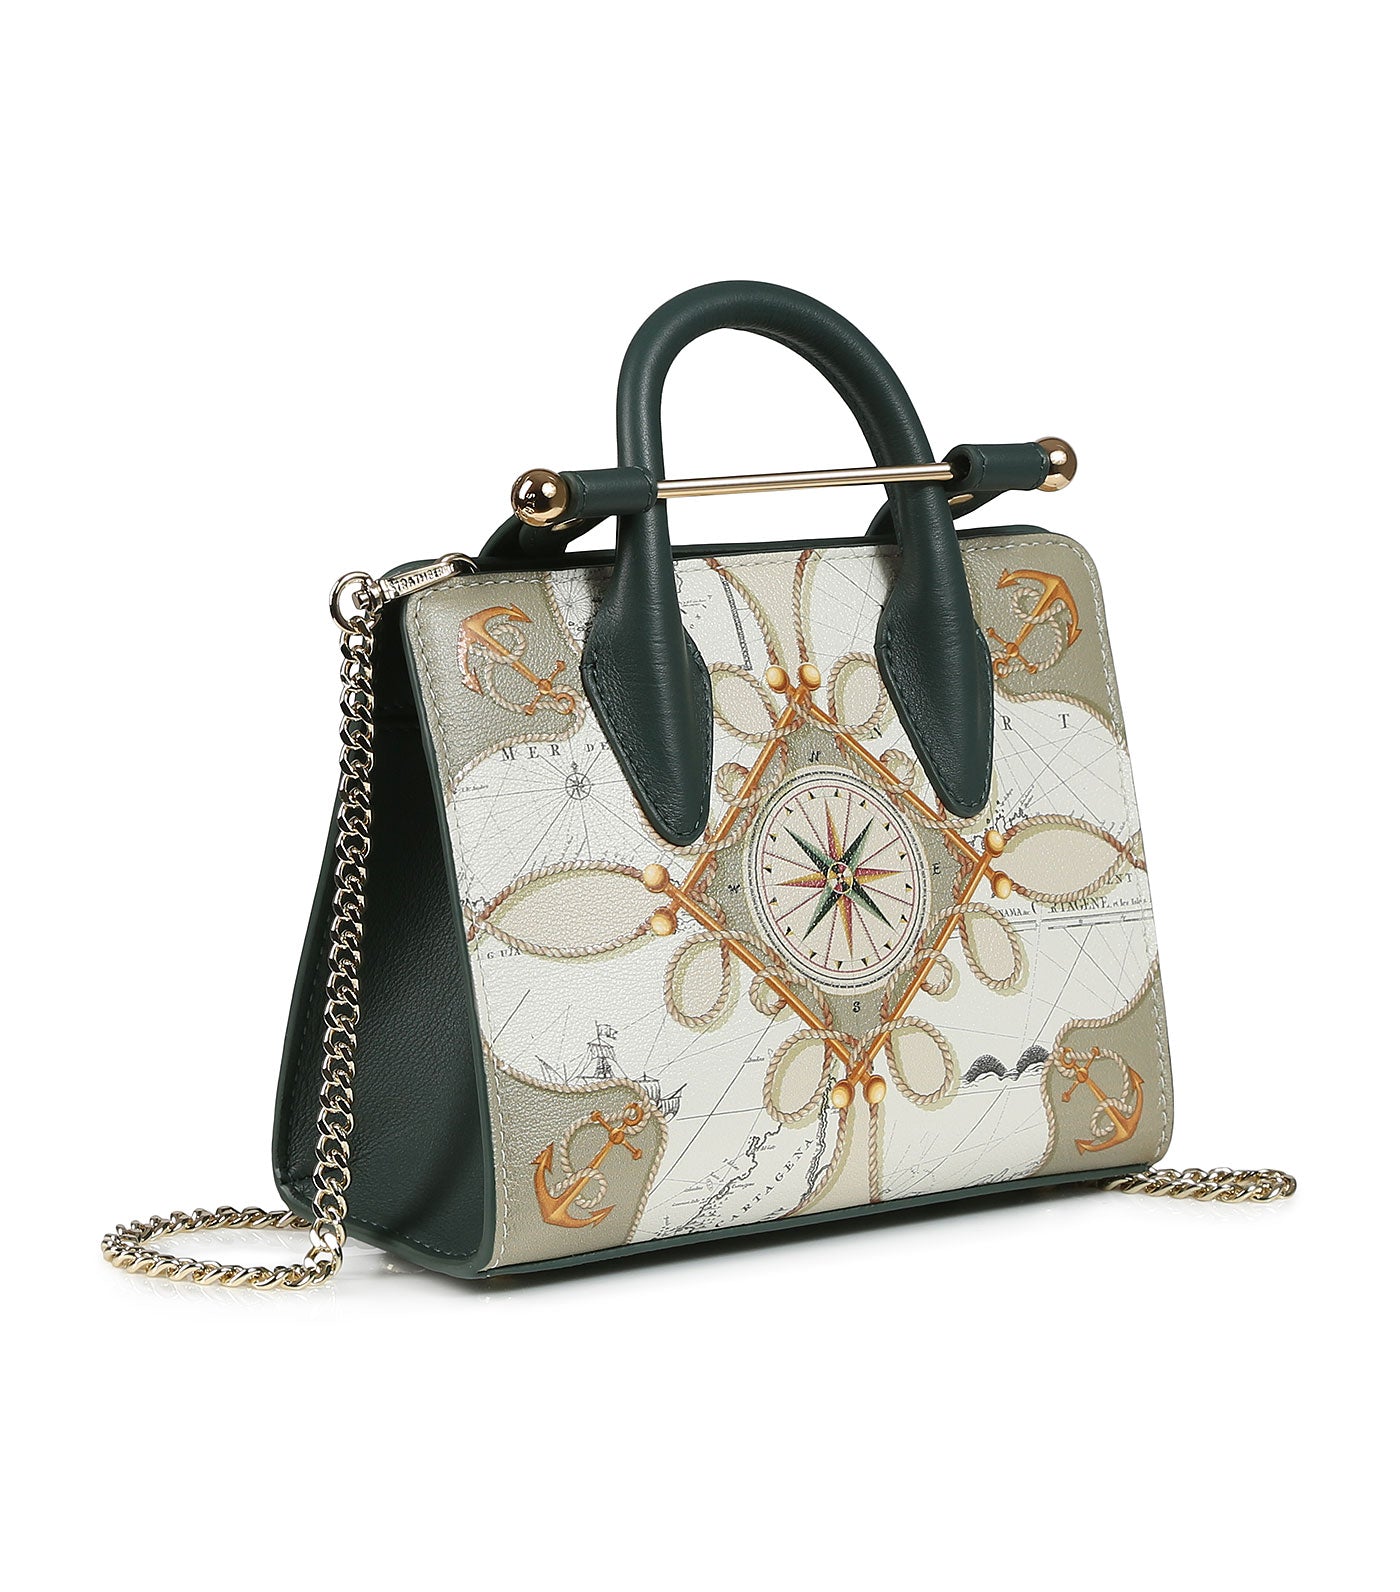 Strathberry Ladies Nano Tote in Green